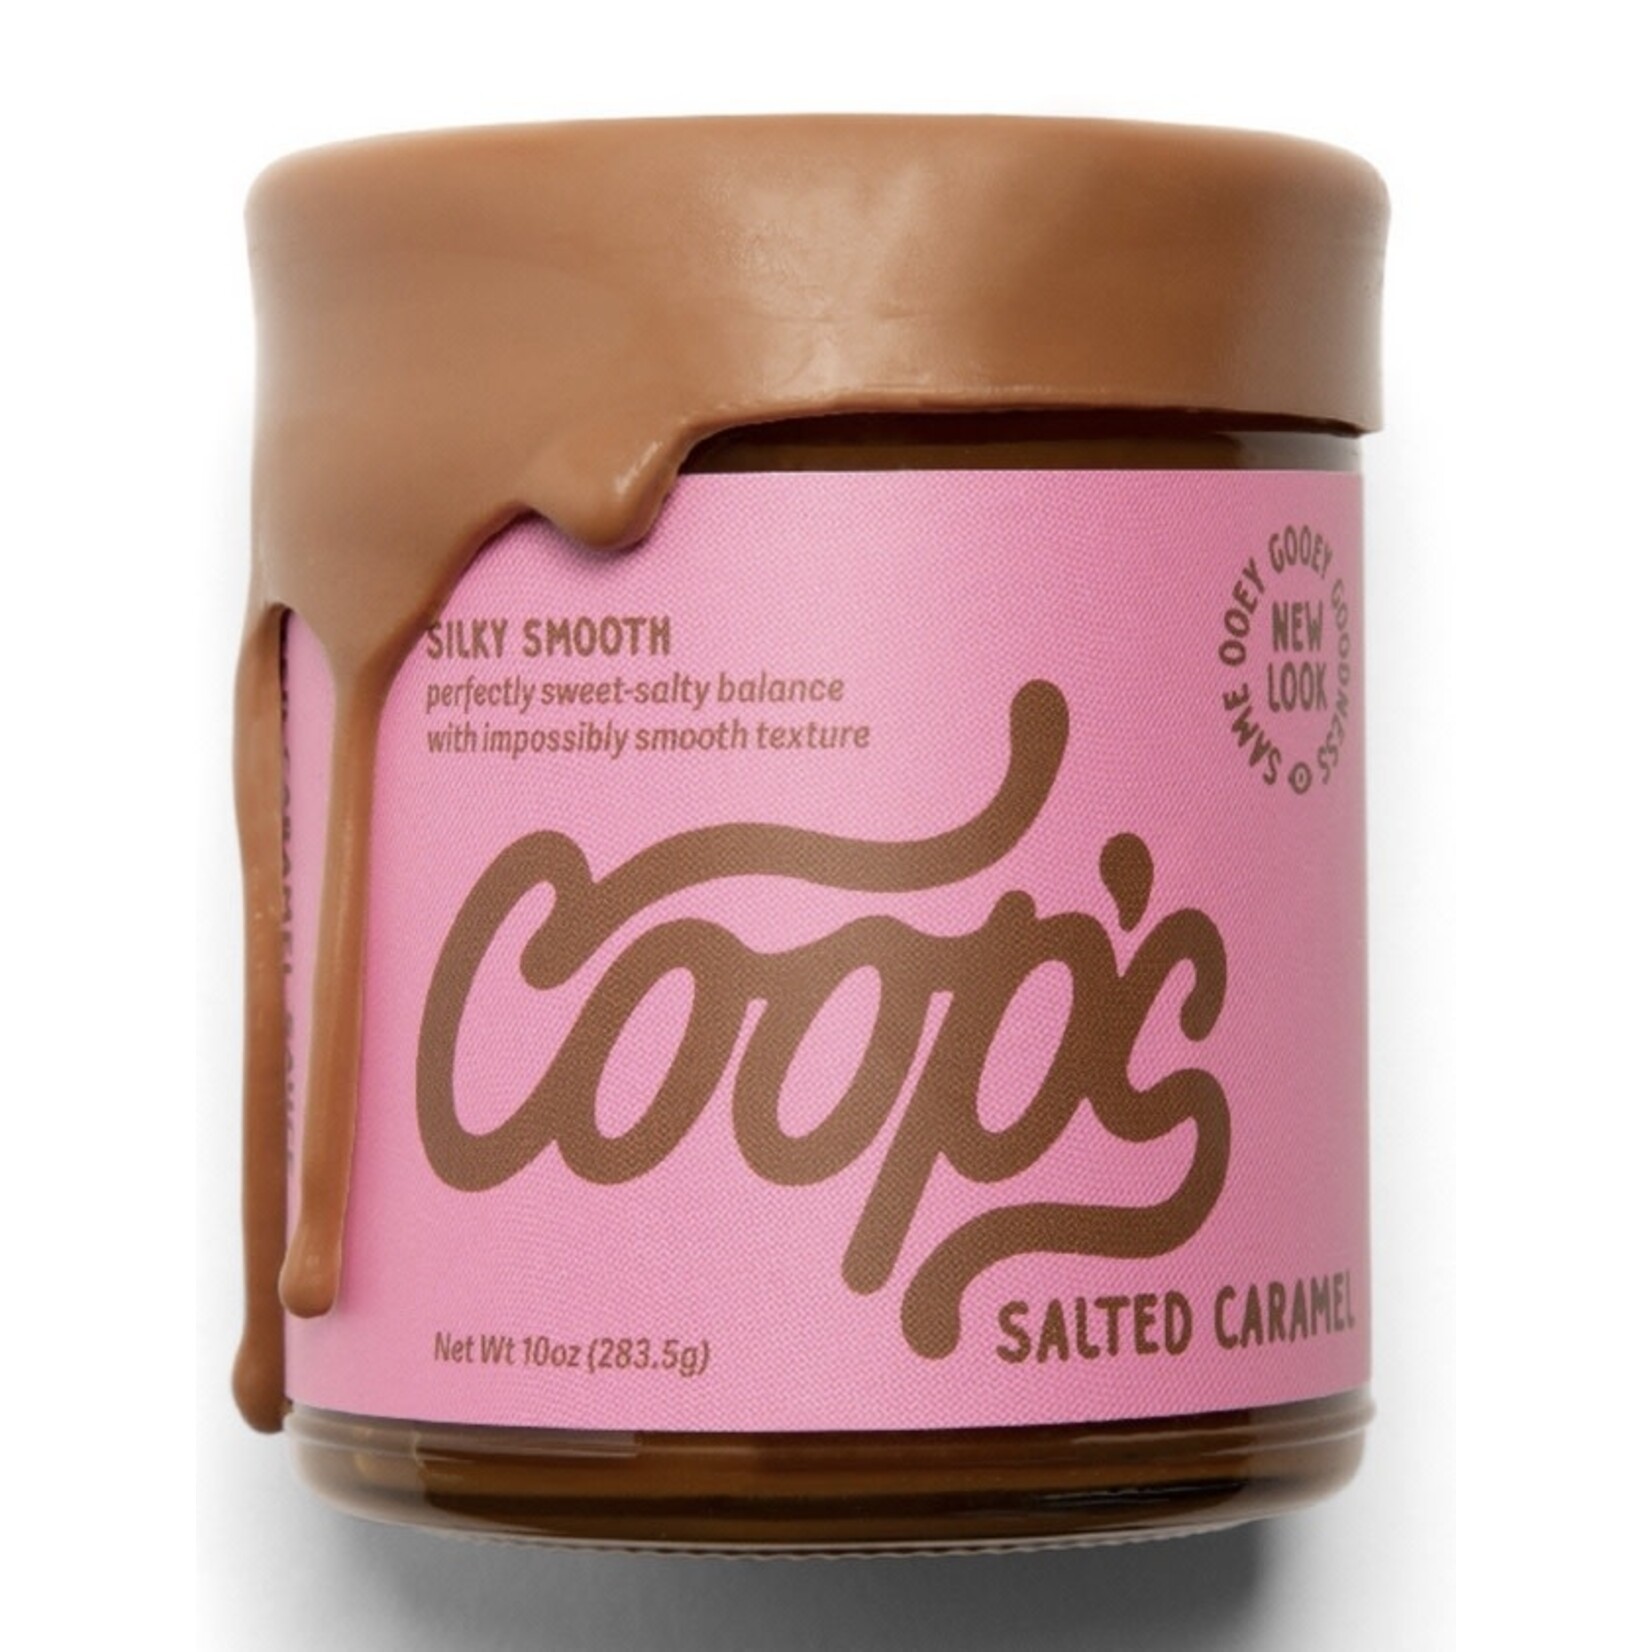 COOPS COOPS Salted Caramel Sauce